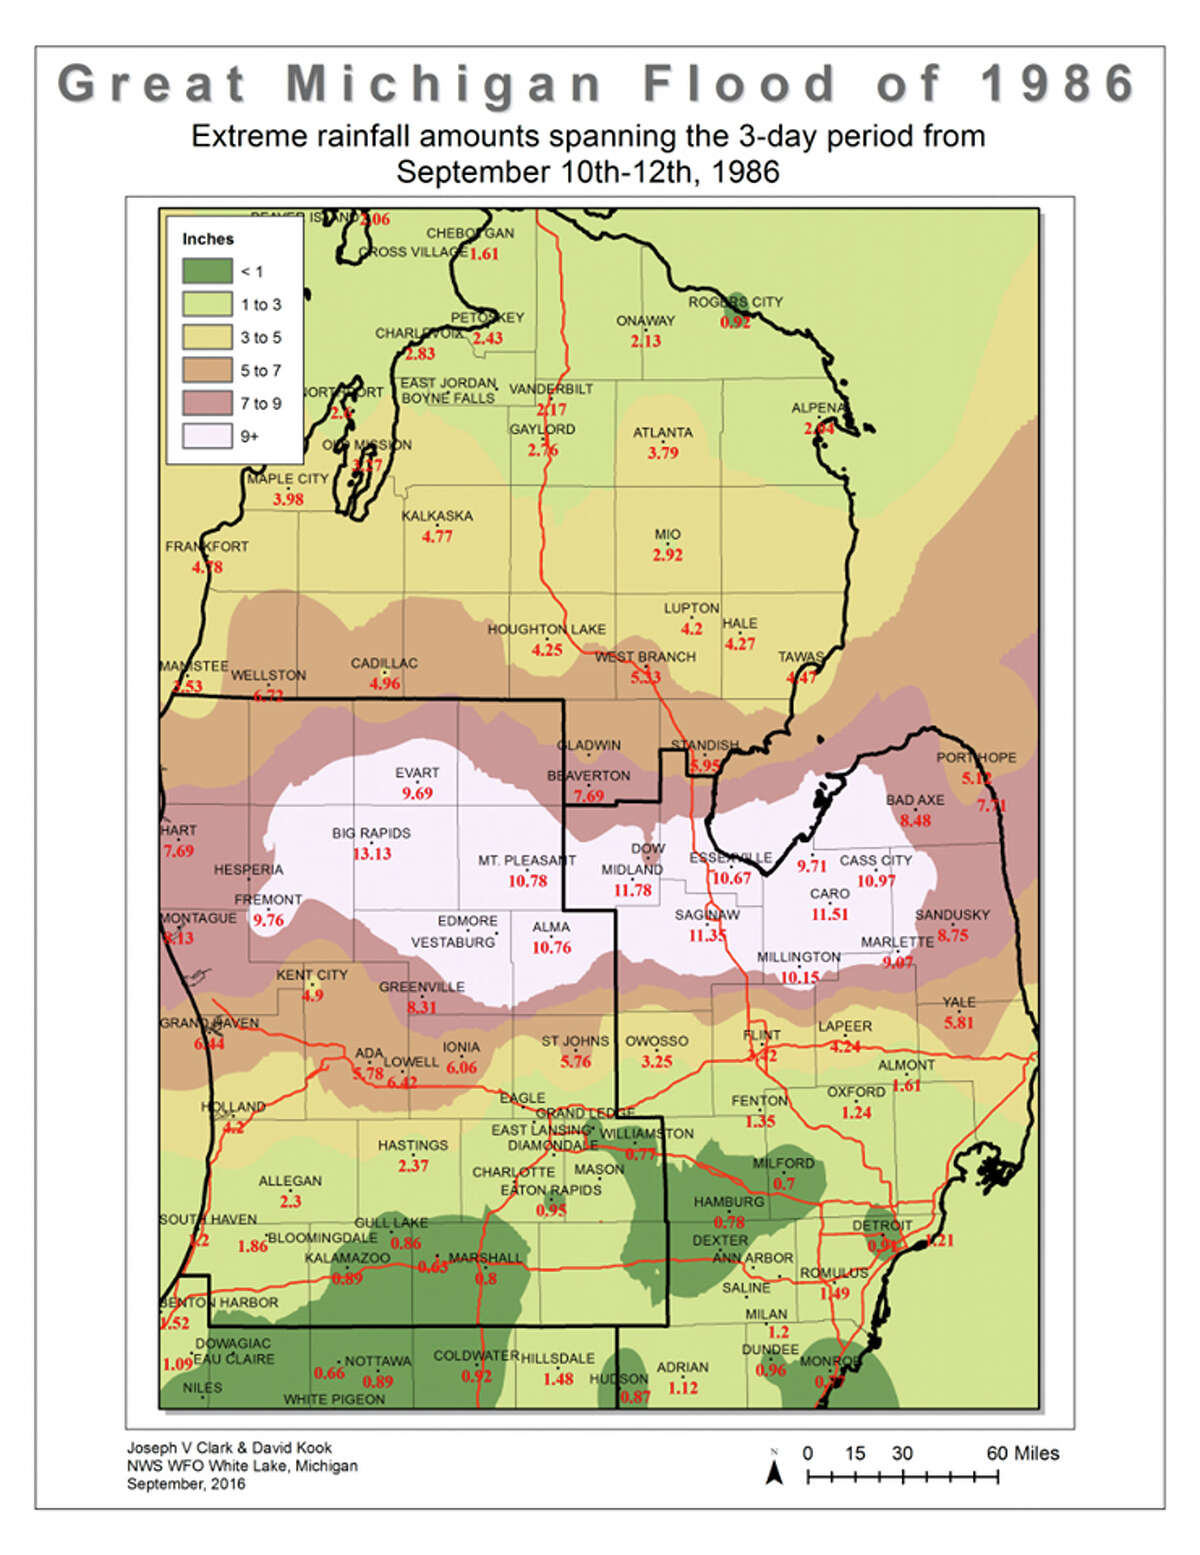 Great Michigan Flood of 1986: Extreme rainfall amounts spanning the three-day period from Sept. 10-12.